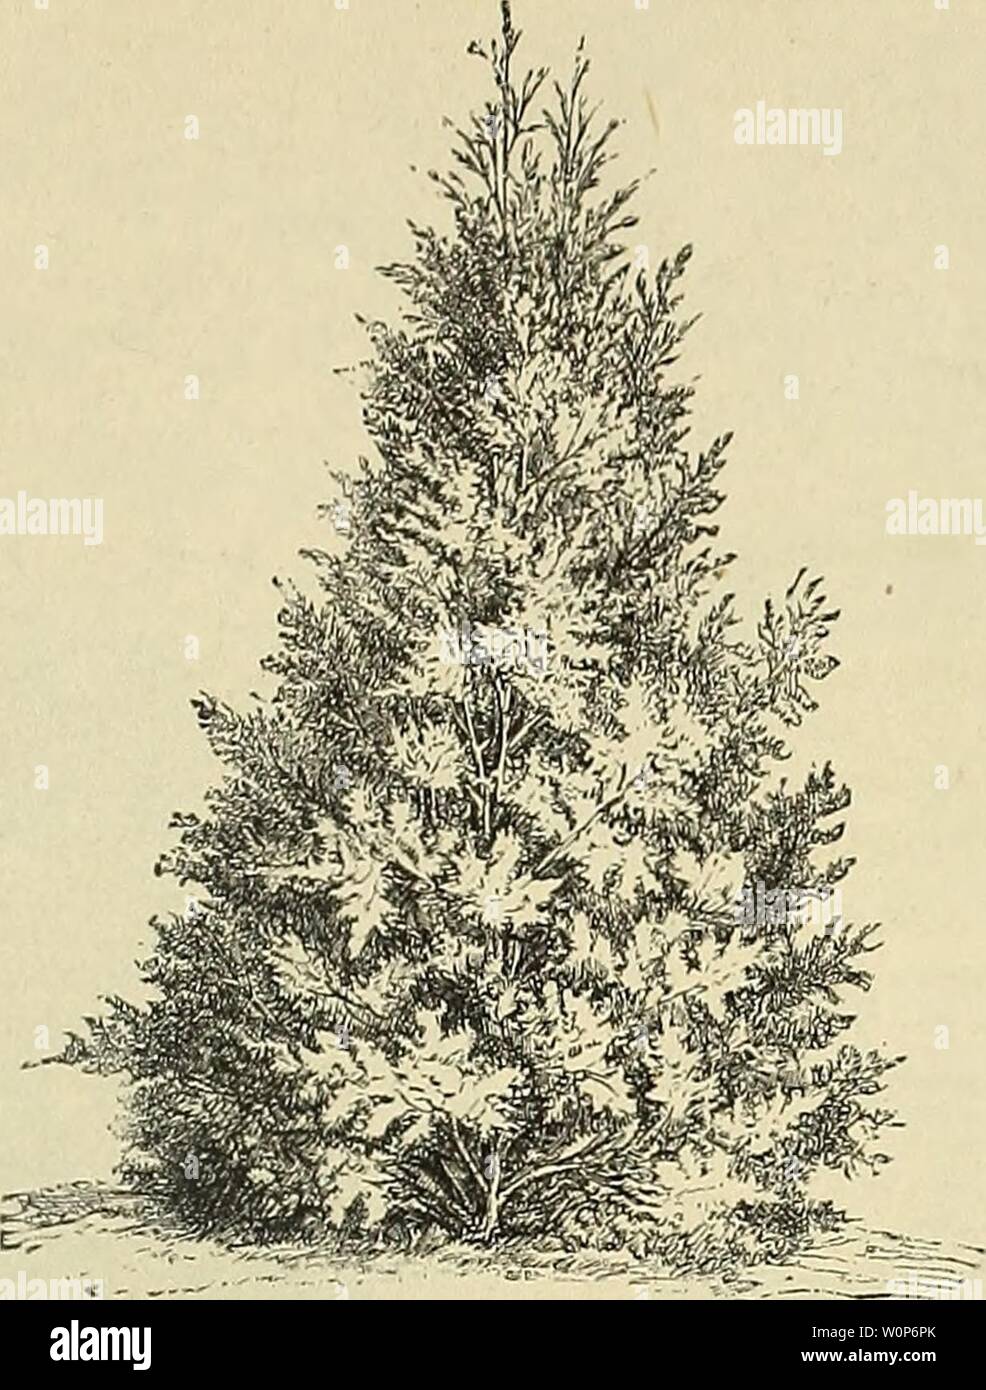 Archive image from page 18 of Descriptive catalogue of ornamental trees,. Descriptive catalogue of ornamental trees, plants, vines, fruits, etc. descriptivecatal1893moon Year: 1893  Flowering Seeds. 15    THUYA OCCIDENTALIS. THUYA occidentalis compacta (Parson's Compact Arbor-vitae). Dwarf, dense habit; grows three or four feet high; one of the best for cemeteries, be- ing of very neat habit. 50 cts. T. o. cristata (Crested Arbor-vitae). Singular and pretty while young. 75 cts. T. o. ericoides (Heath Arbor-vitae). A low bush, closely resembling the heaths of Eui'ope, with soft feathery foliage Stock Photo